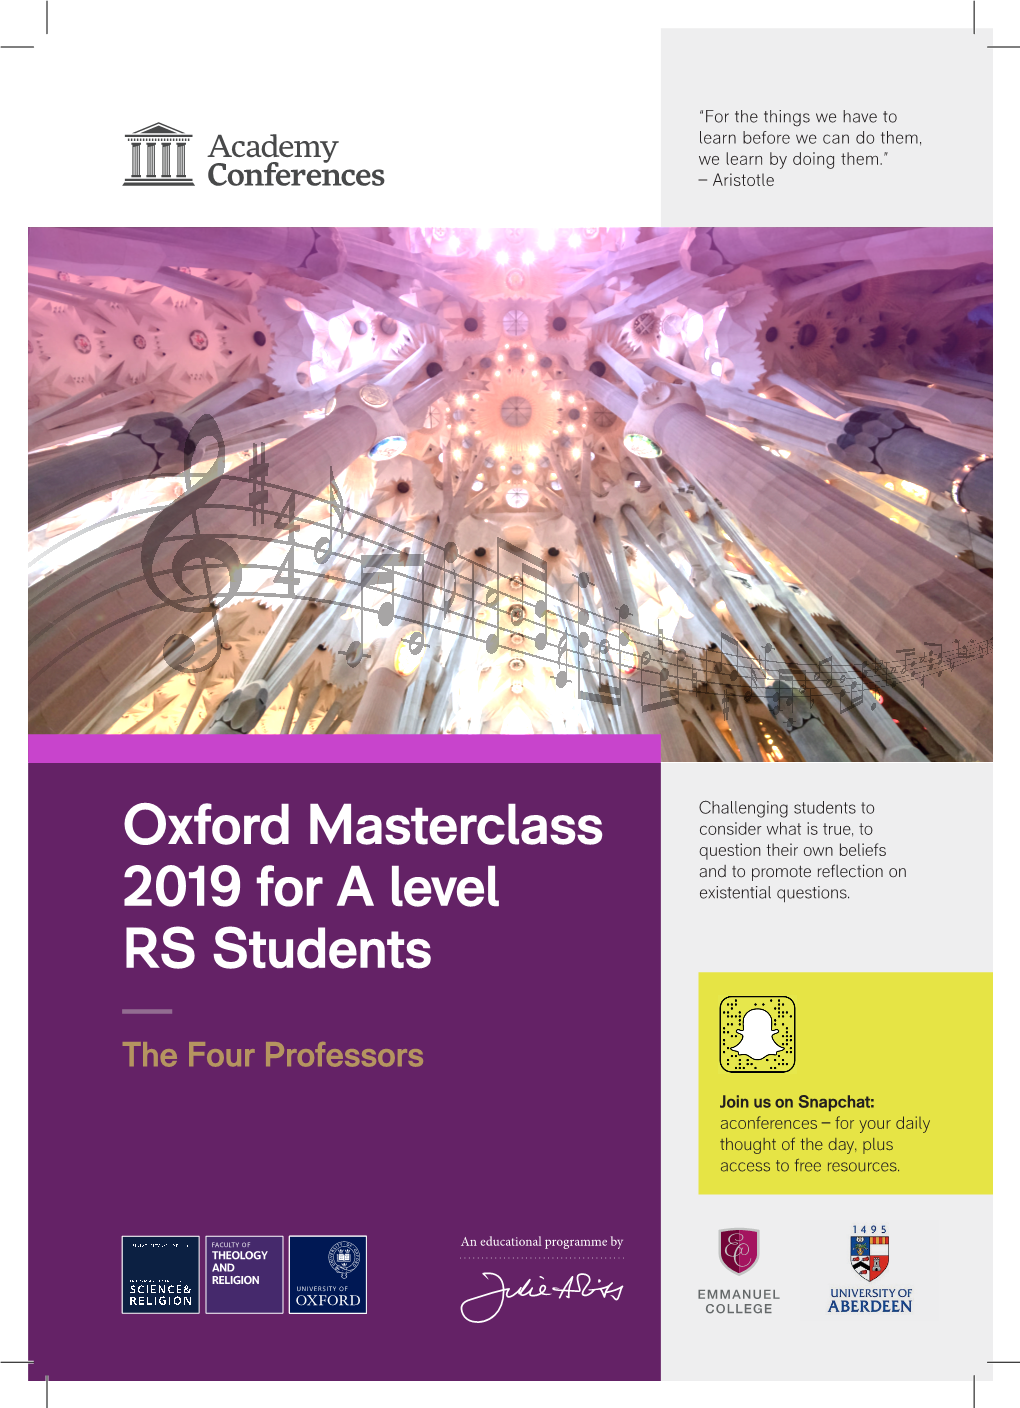 Oxford Masterclass 2019 for a Level RS Students